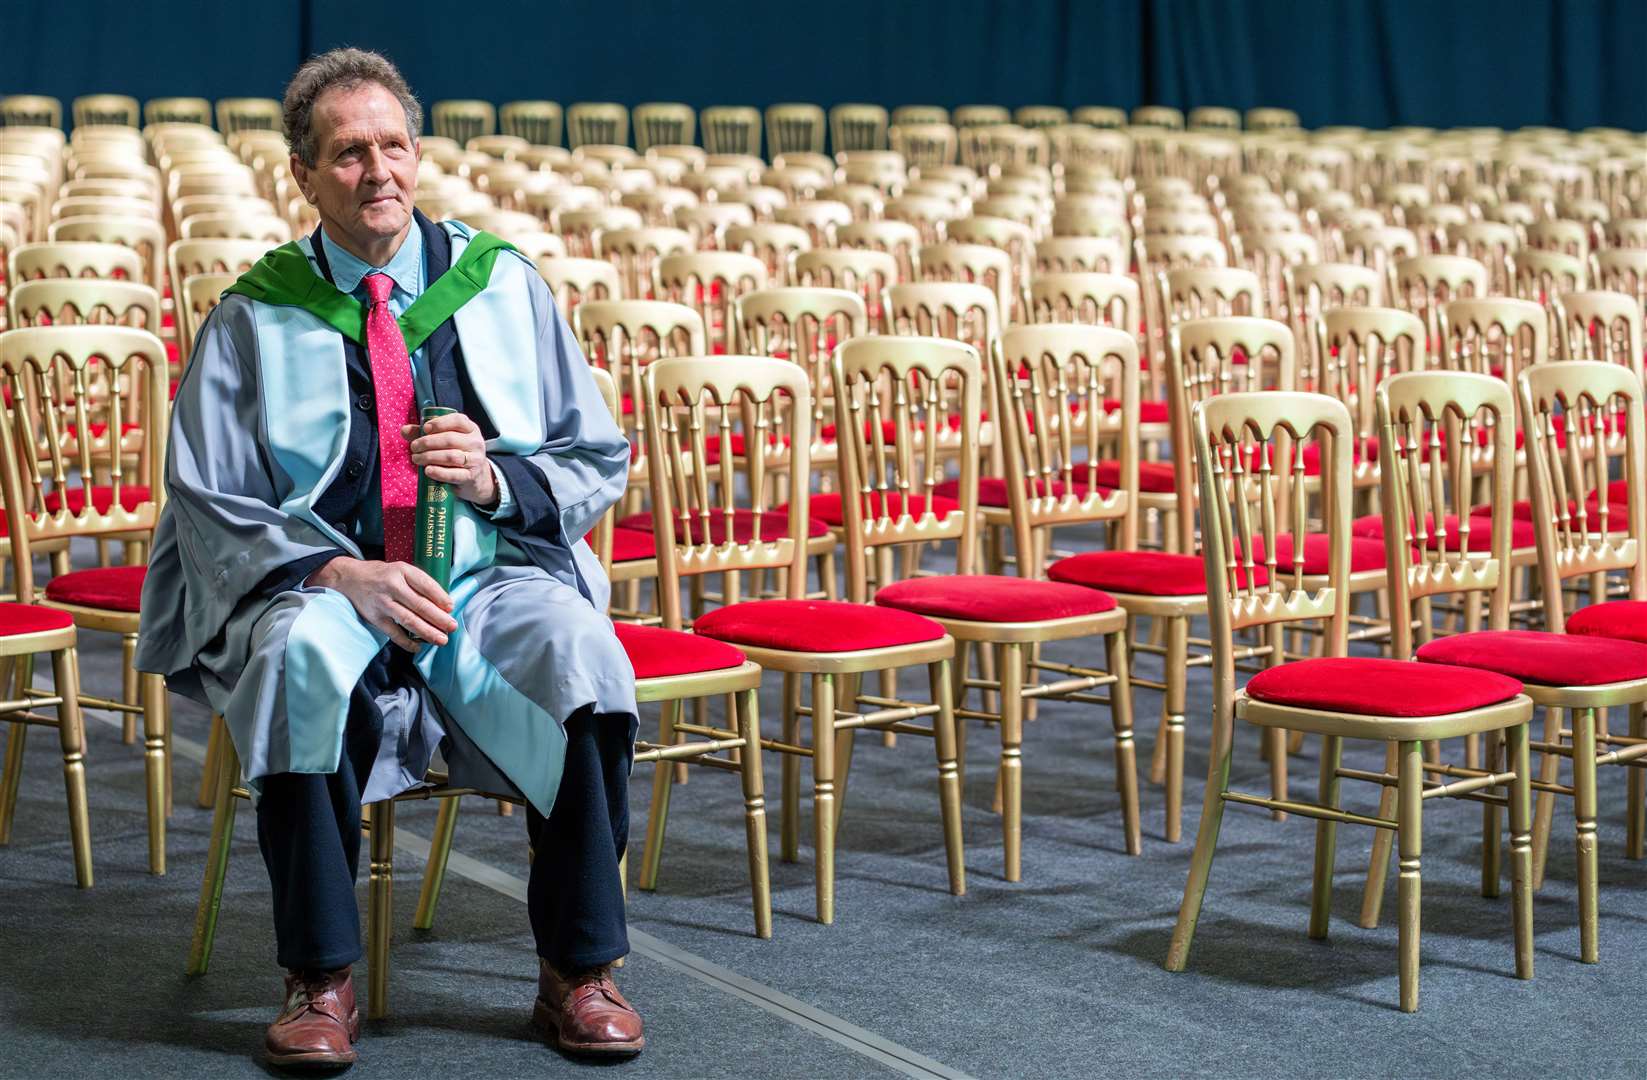 Monty Don received his degree during a graduation ceremony on Friday (Elaine Livingston/PA)